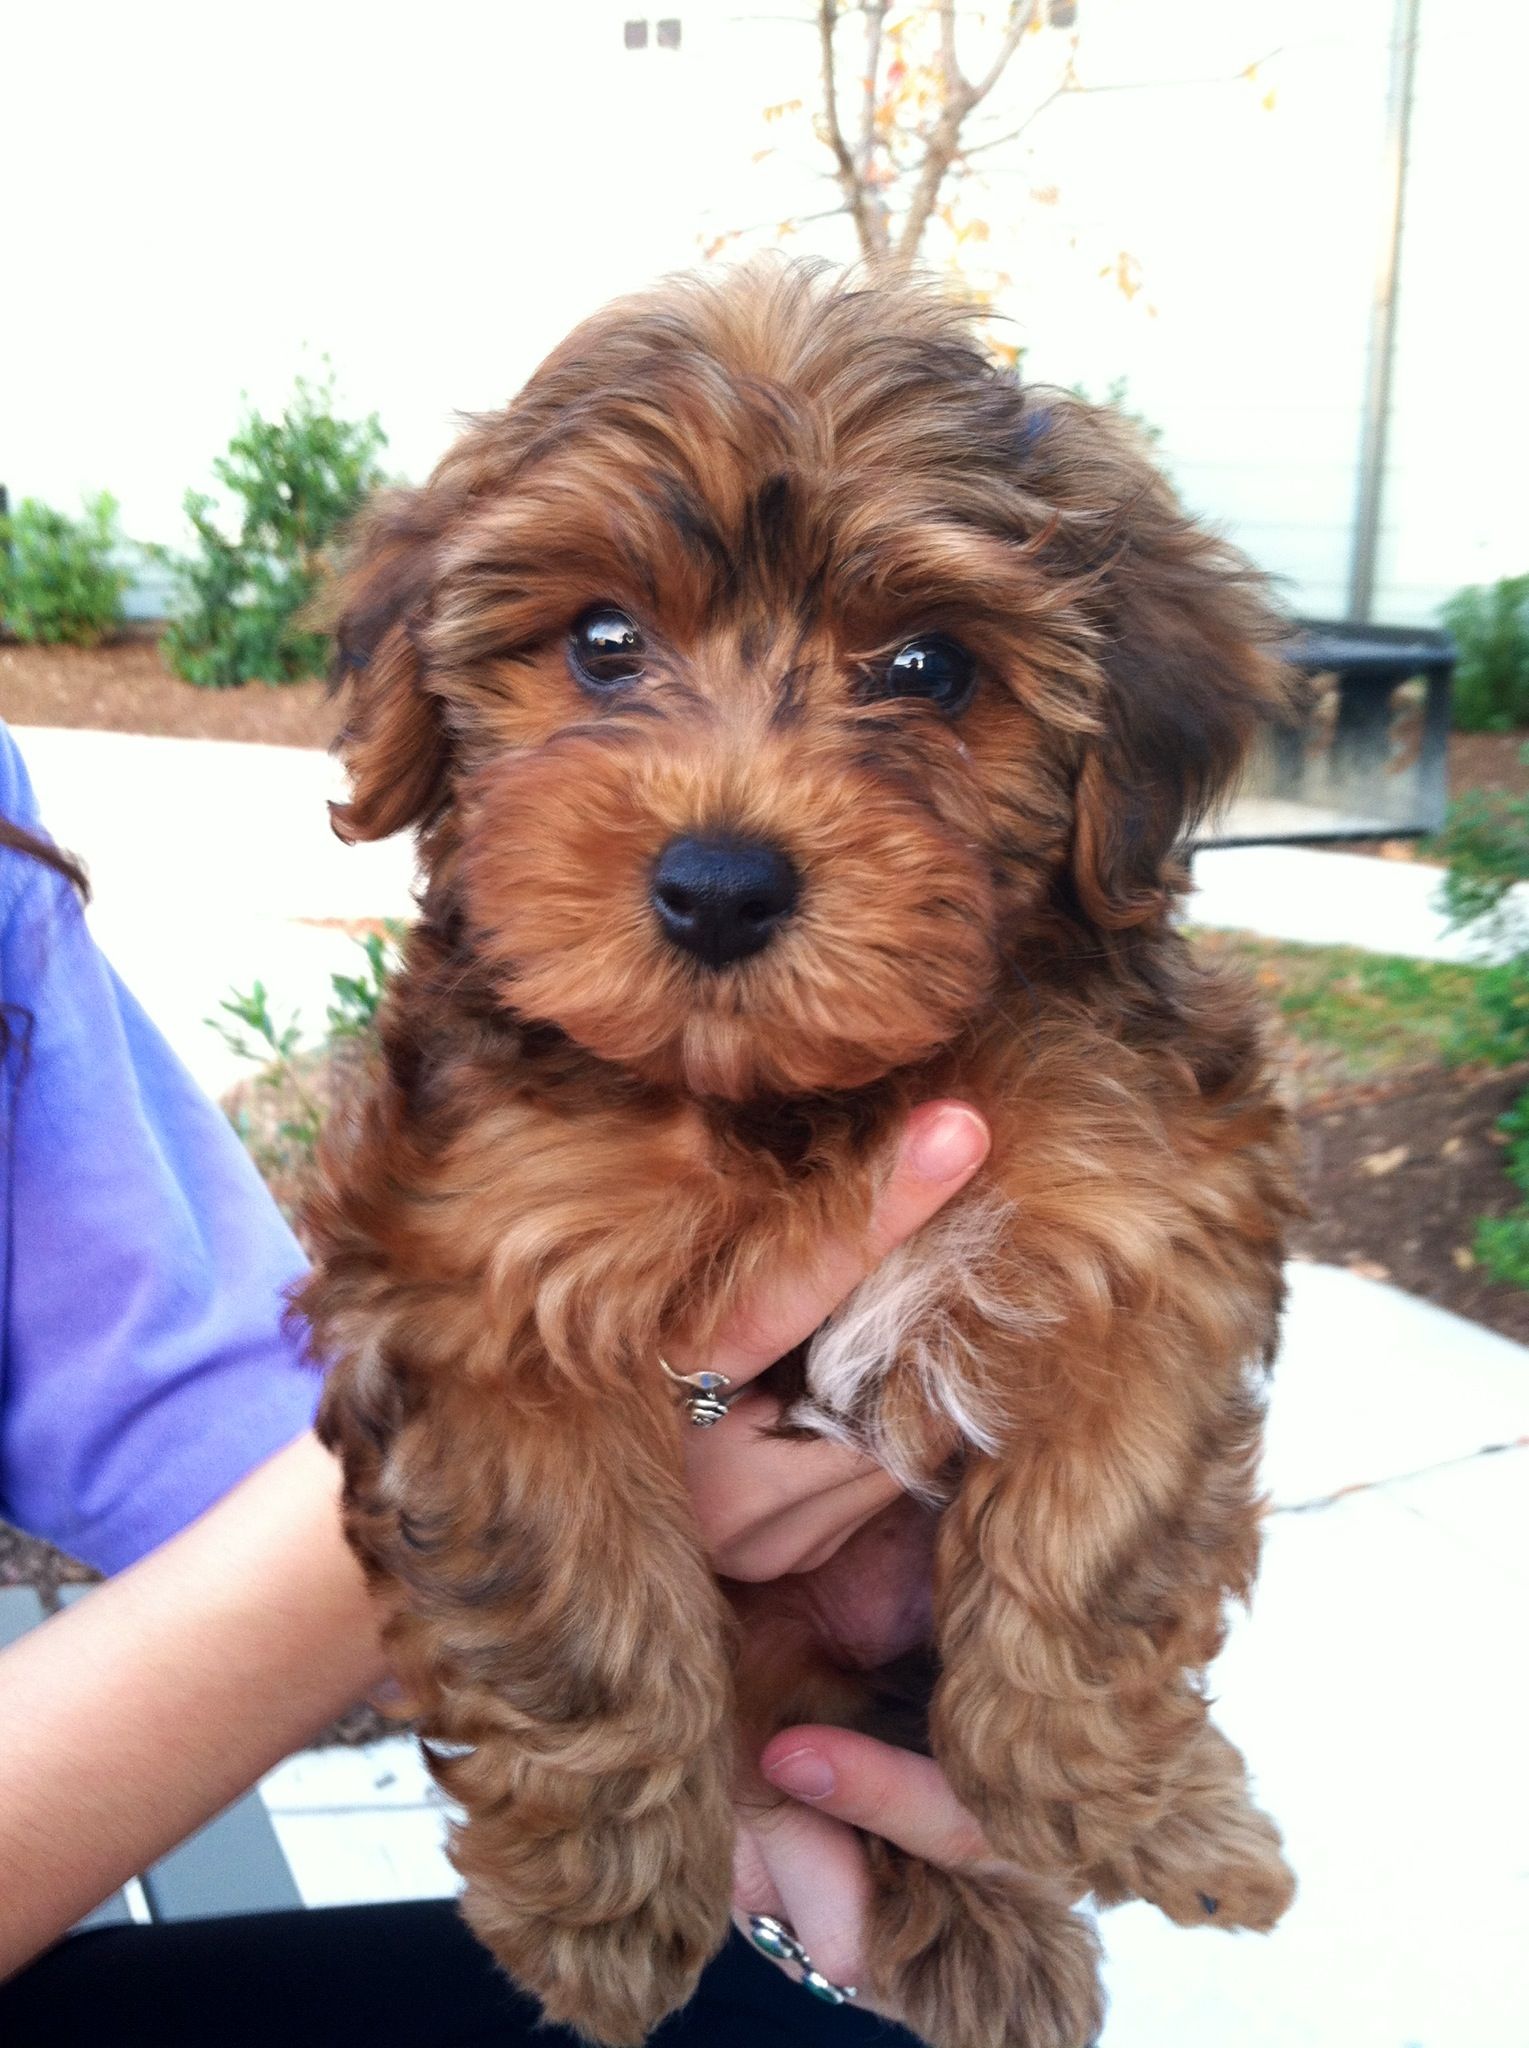 Yorkie Poo - The Cutest and Adorable Mix of Yorkie and 